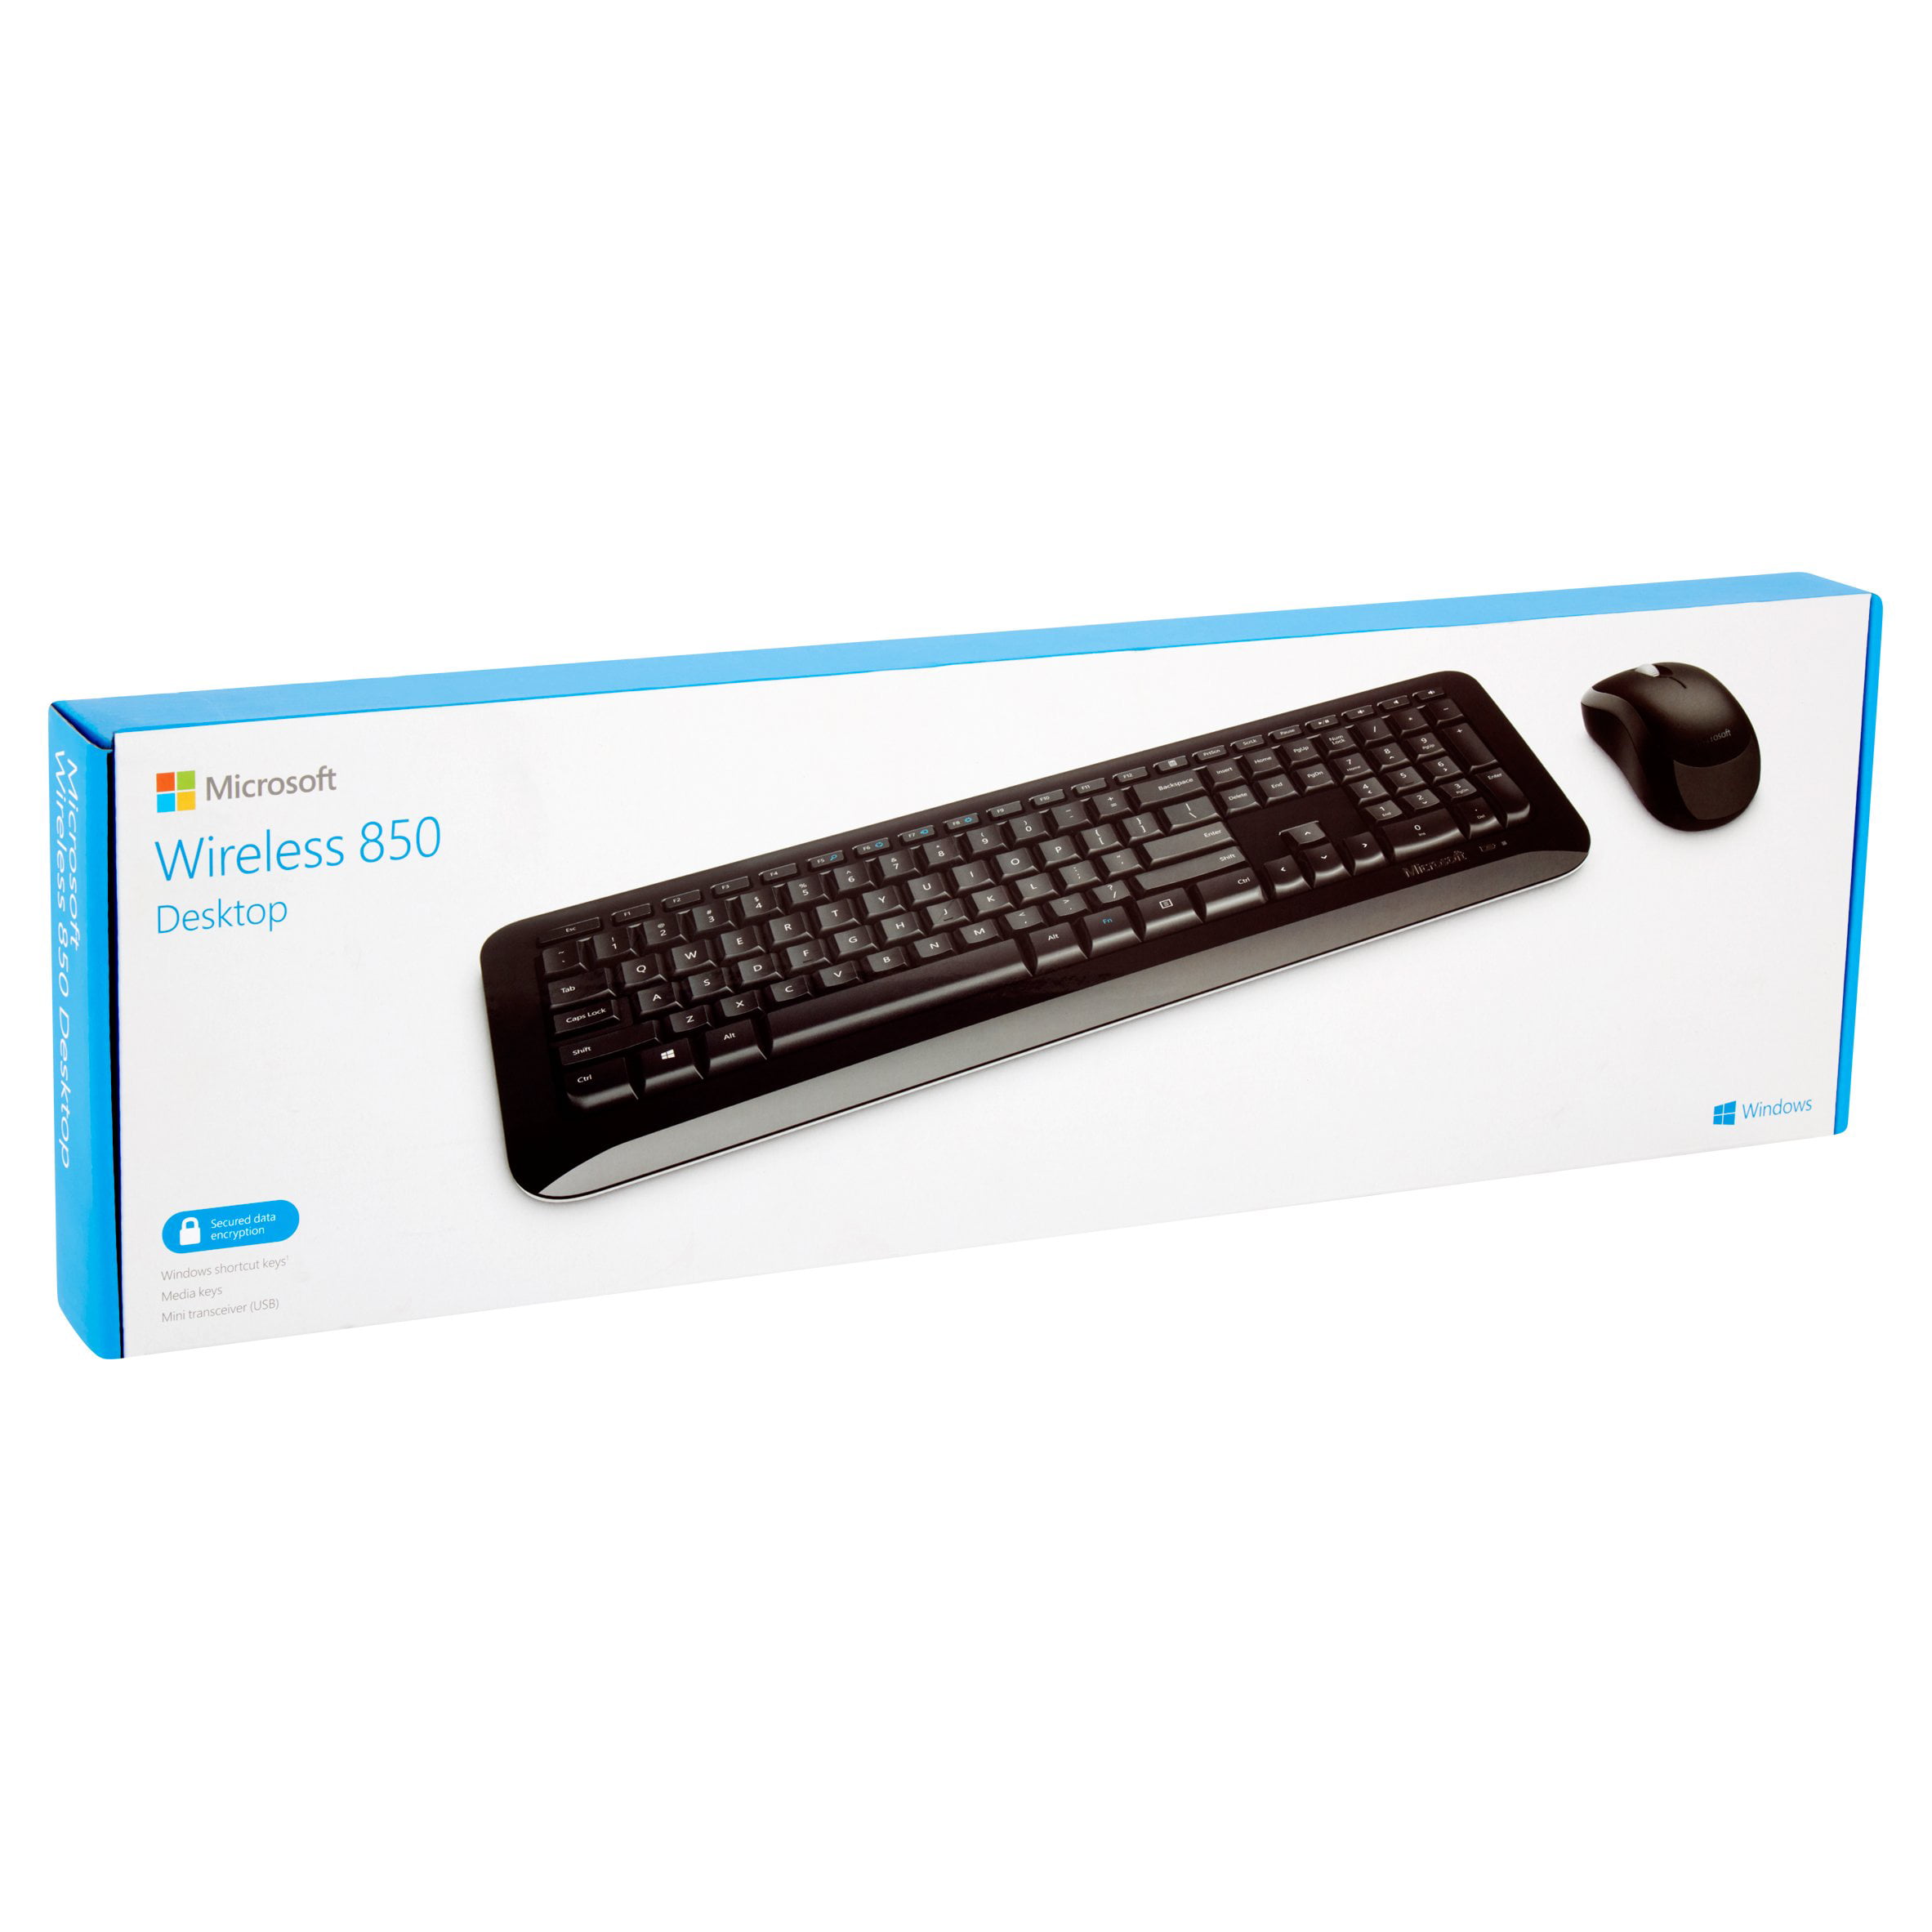 Microsoft Wireless Desktop 850 - Keyboard and Mouse set - with AES 